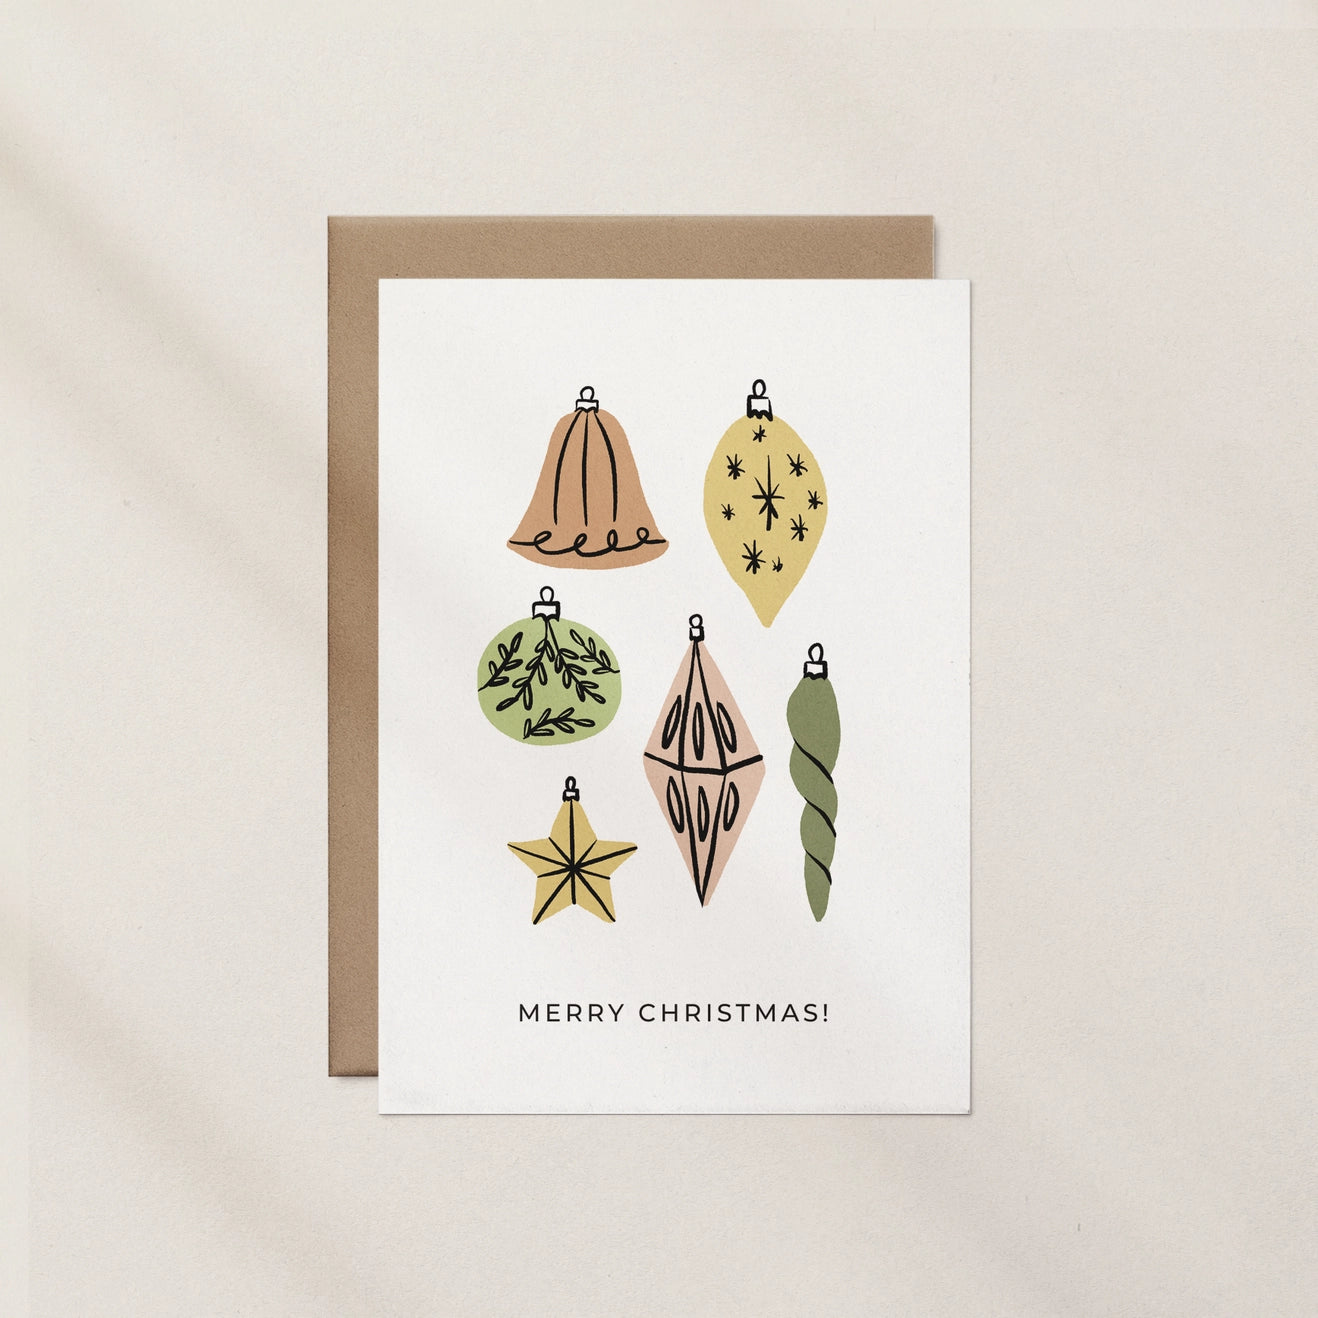 Merry Christmas Sketch Baubles Card